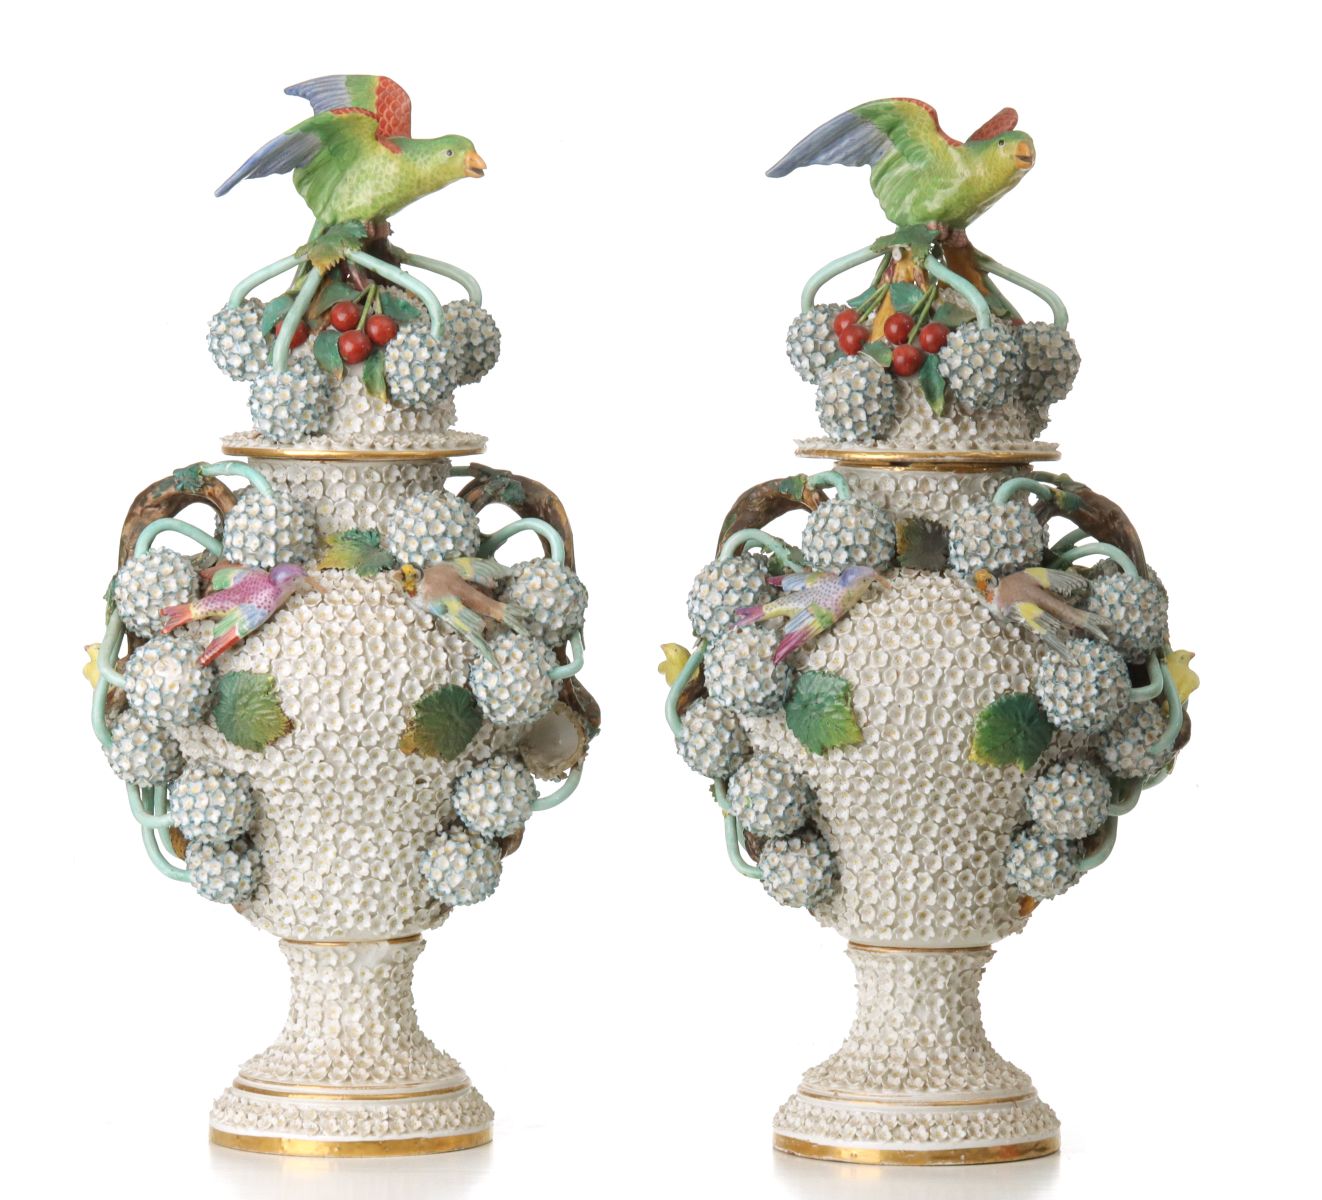 A PAIR 19TH C. FRENCH PORCELAIN SNOWBALL VASES